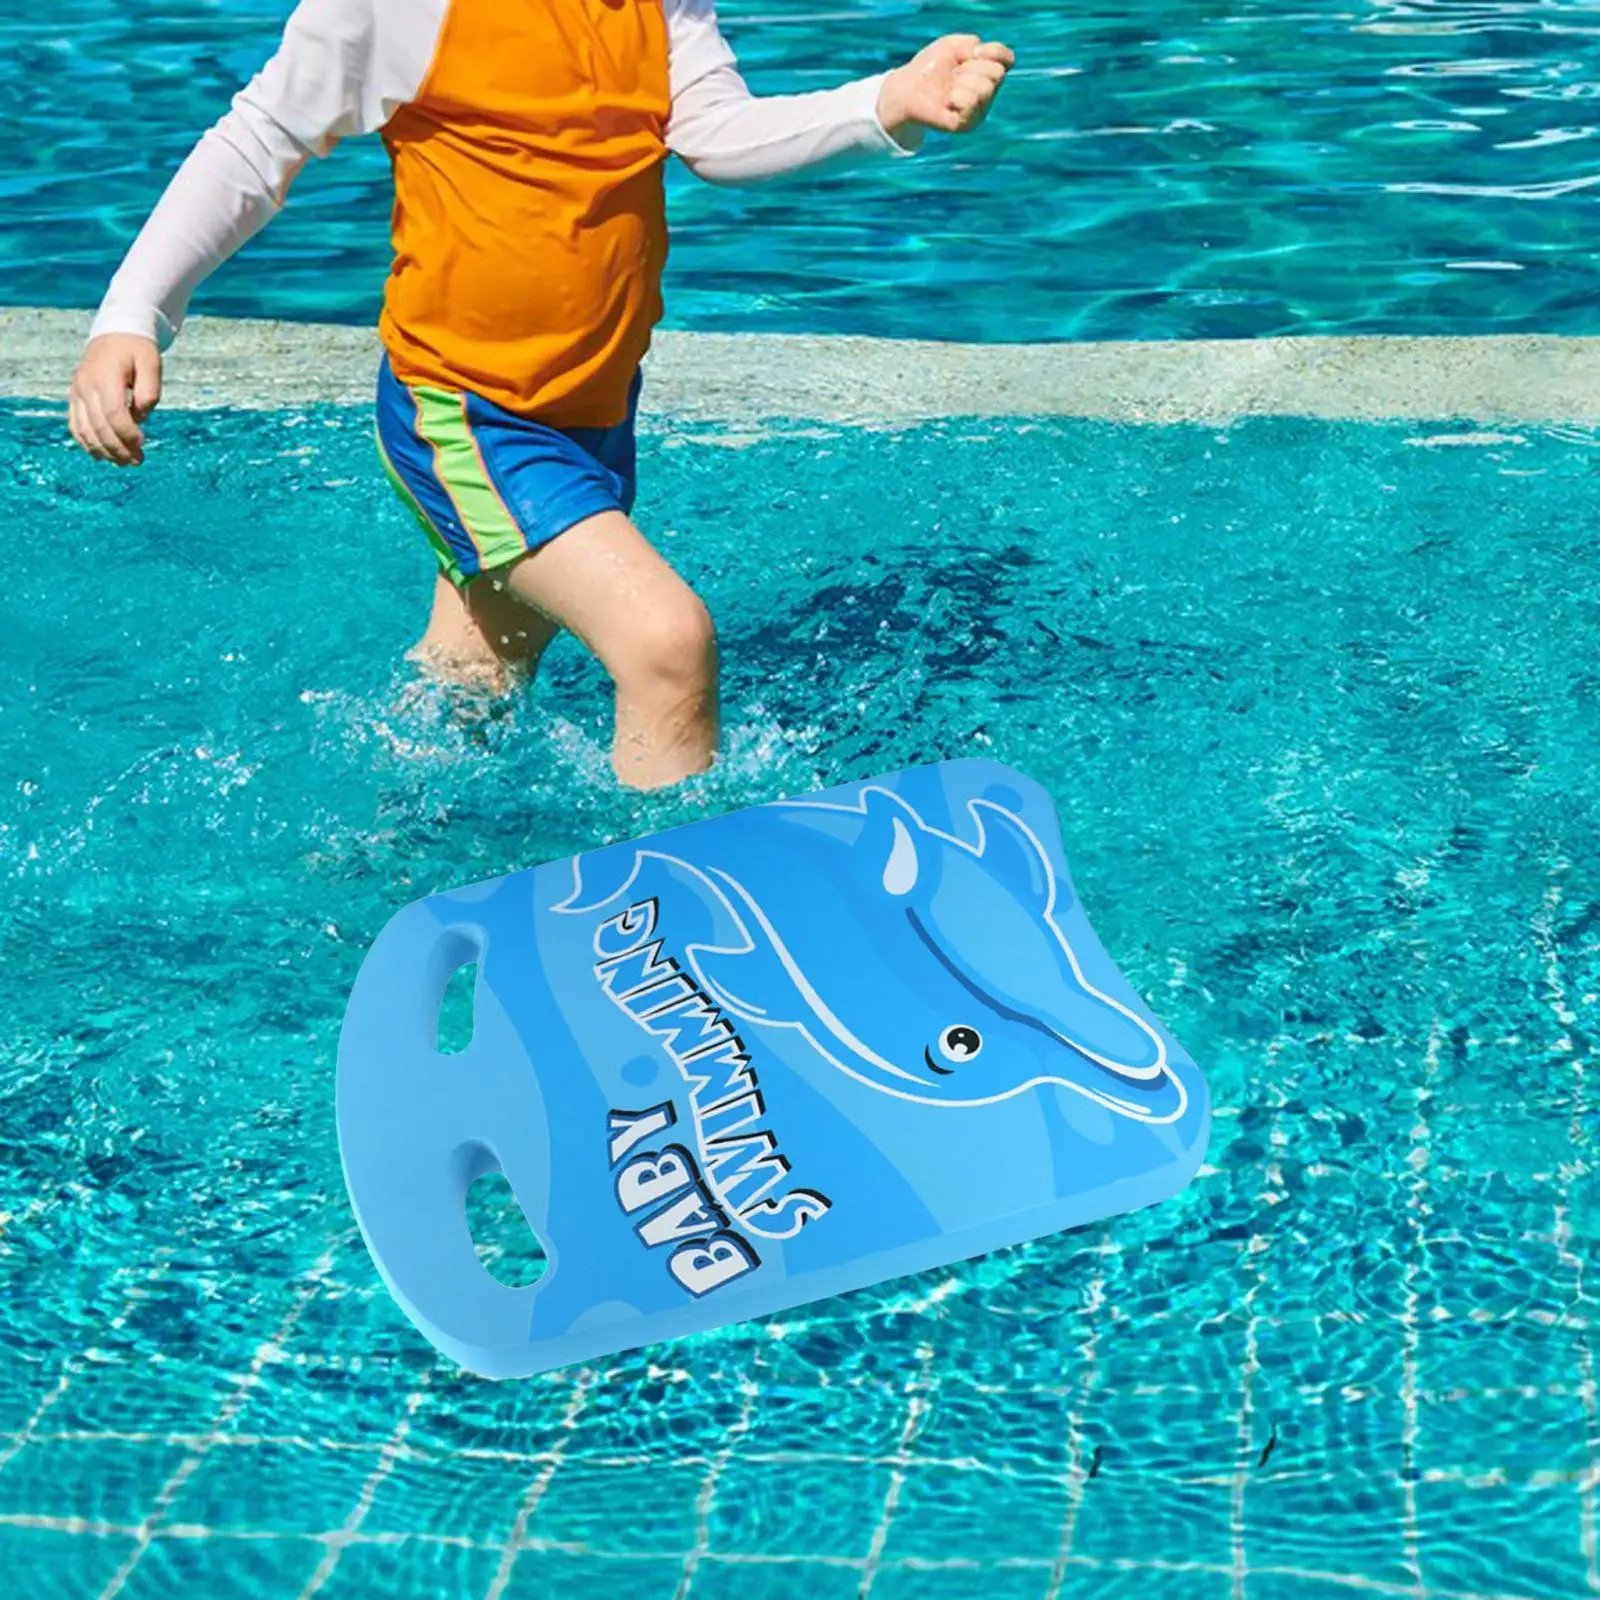 Swimming Kickboard Plate Exercise Equipment Pool Training Aid Swimming Aid Board Durable for Swimming Exercise Kids Men Women